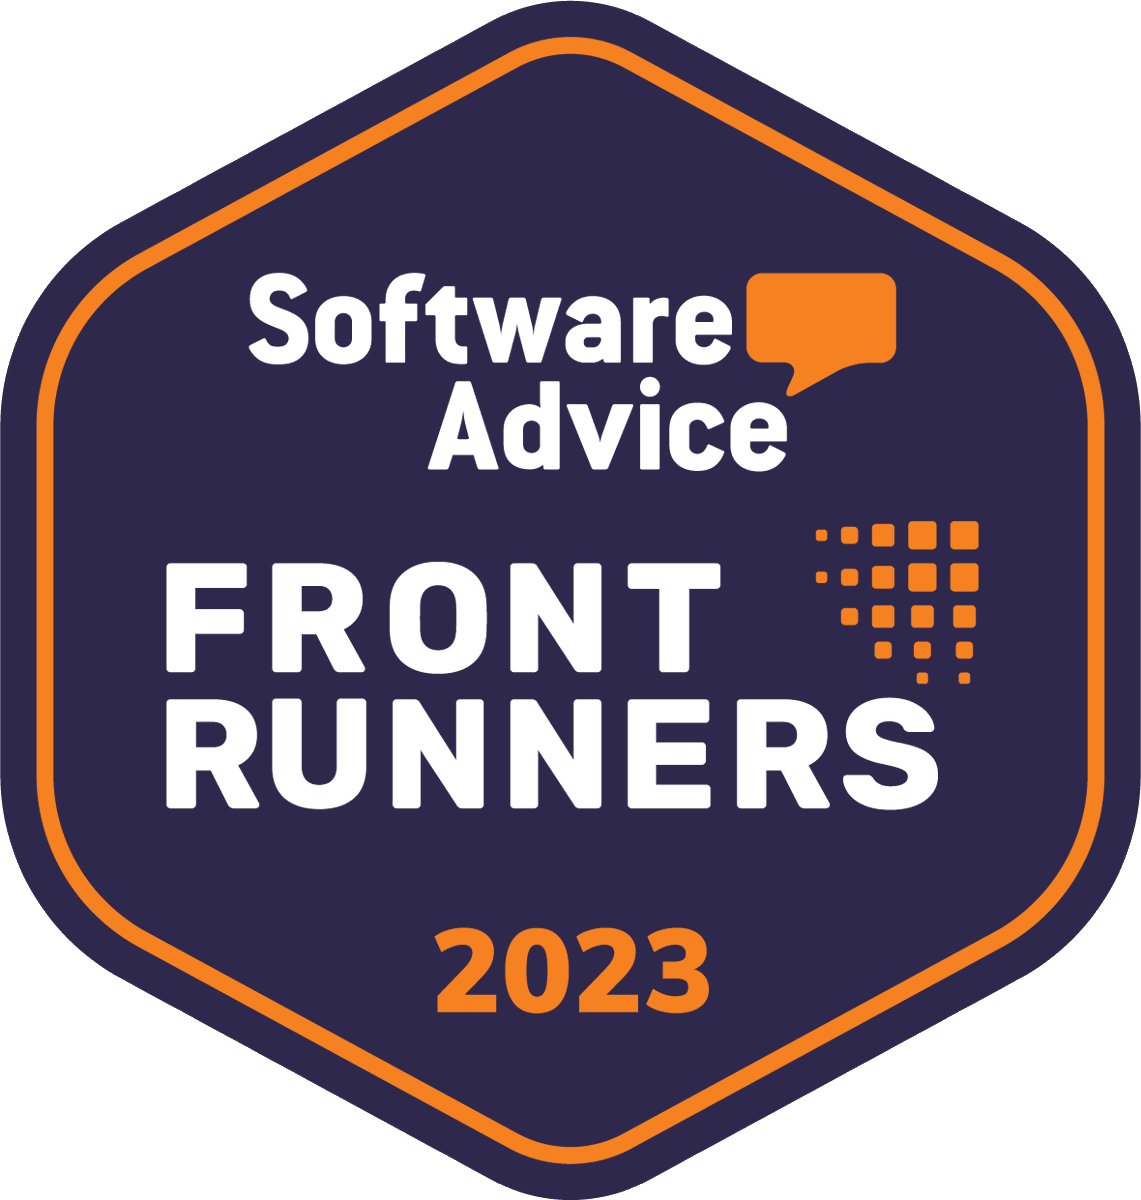 ReviewTrackers is thrilled to be featured as a Frontrunner in our recent flagship report for top Reputation Management Software - 2023! ow.ly/HFXV50Pqf4t